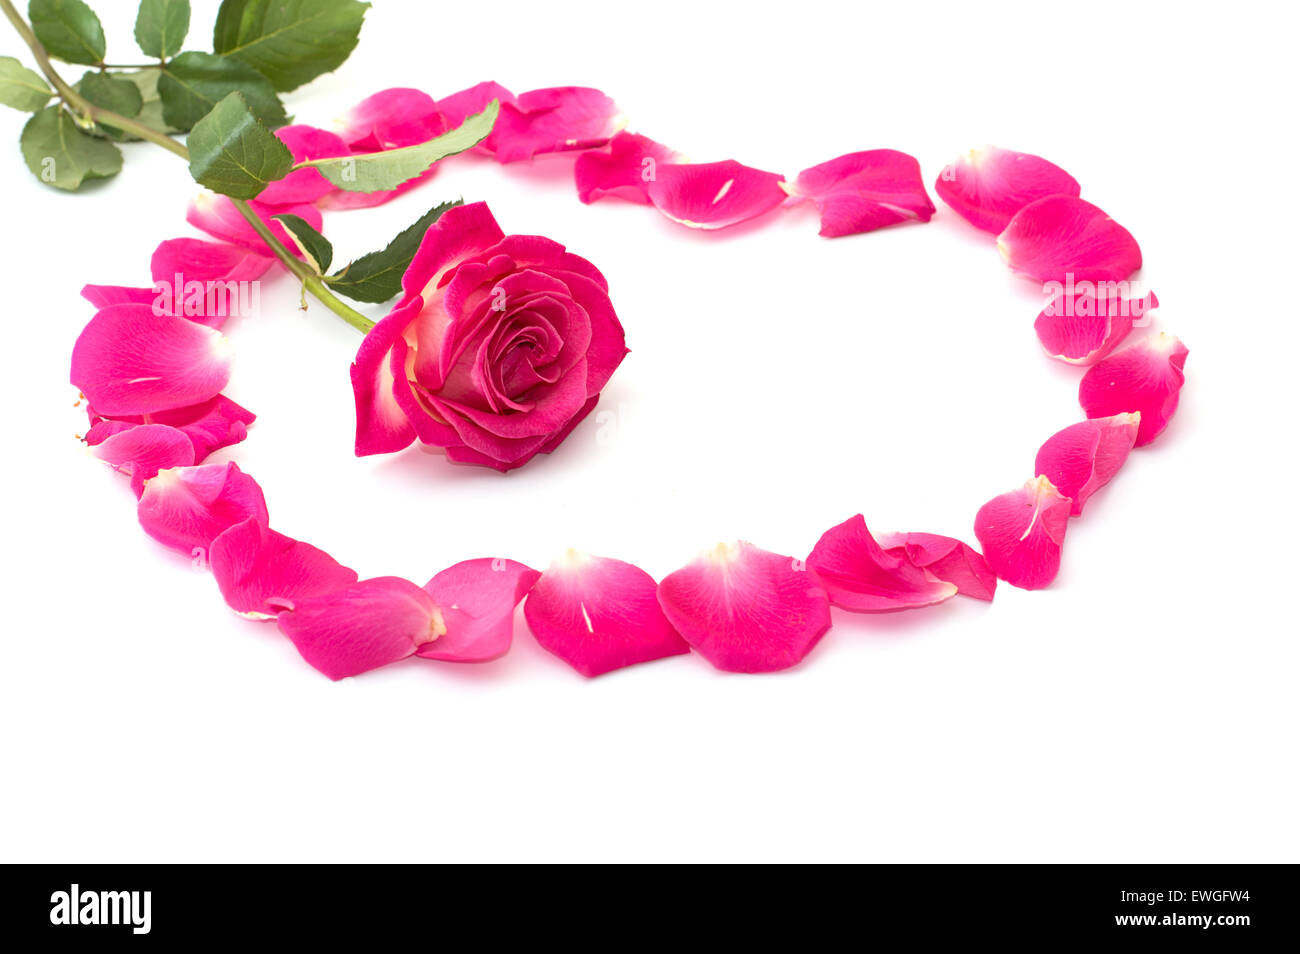 flower of a pink rose at heart center from lobes Stock Photo